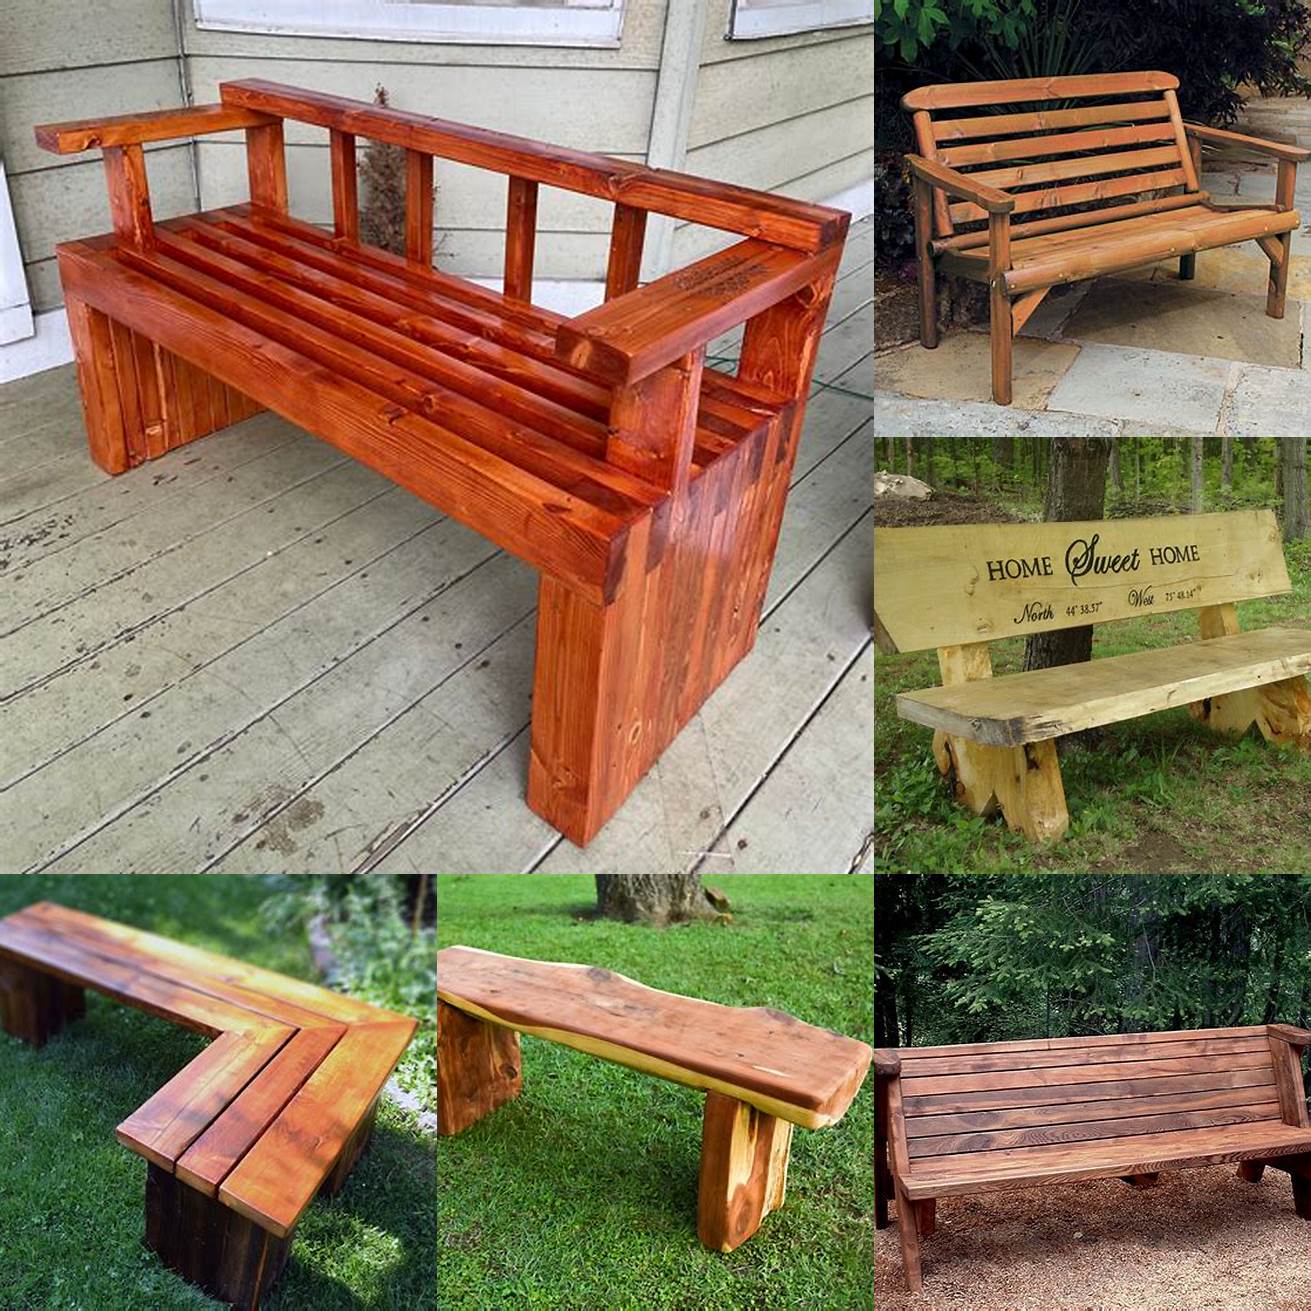 A Rustic Wooden Bench